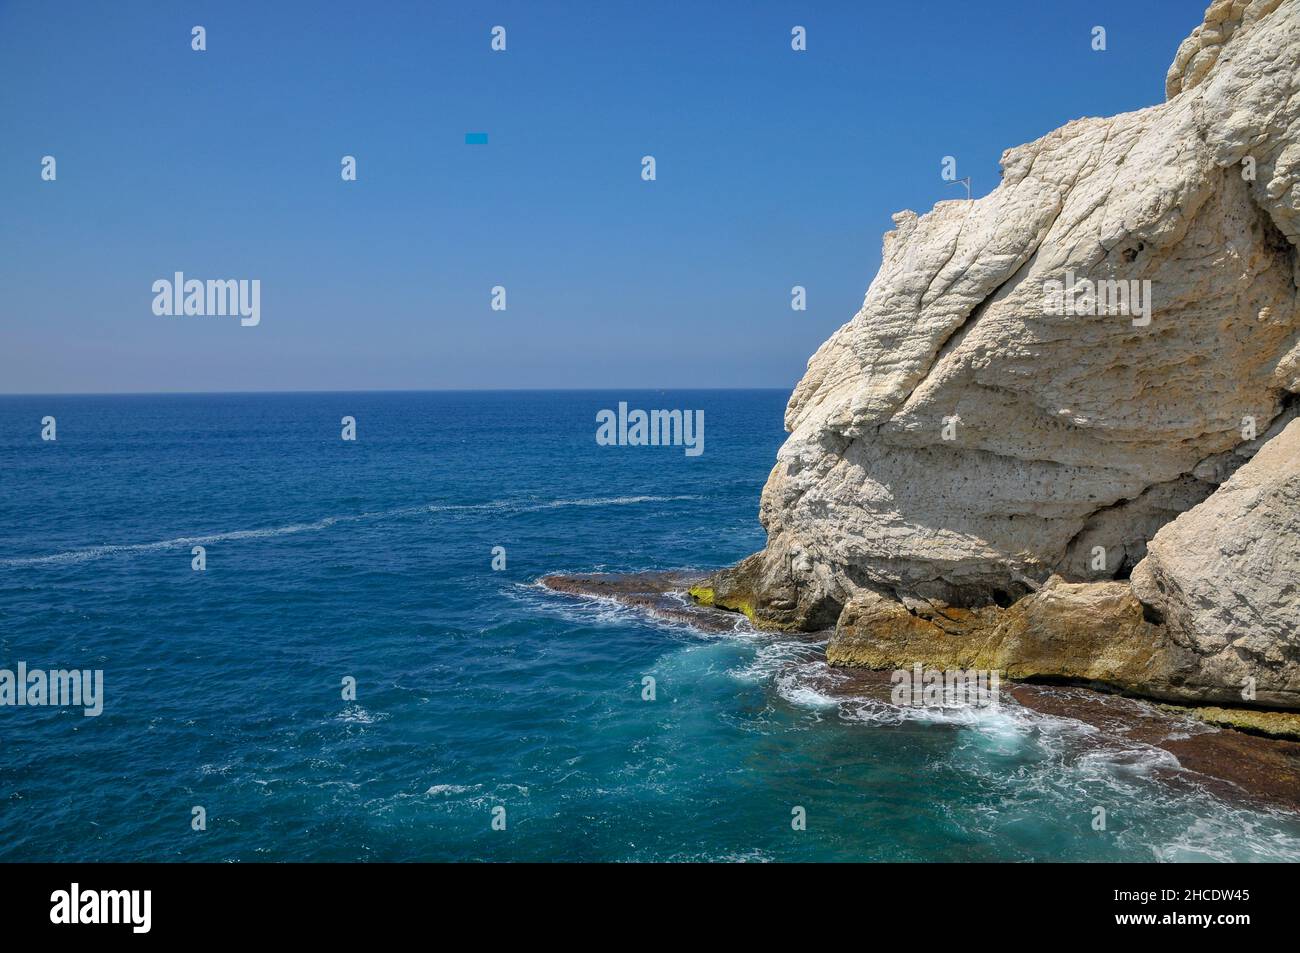 Israel. Rosh Hanikra The white cliff is a chalk cliff on the beach of Upper-Galilee on the border between Israel and Lebanon, chiselled out into labyr Stock Photo